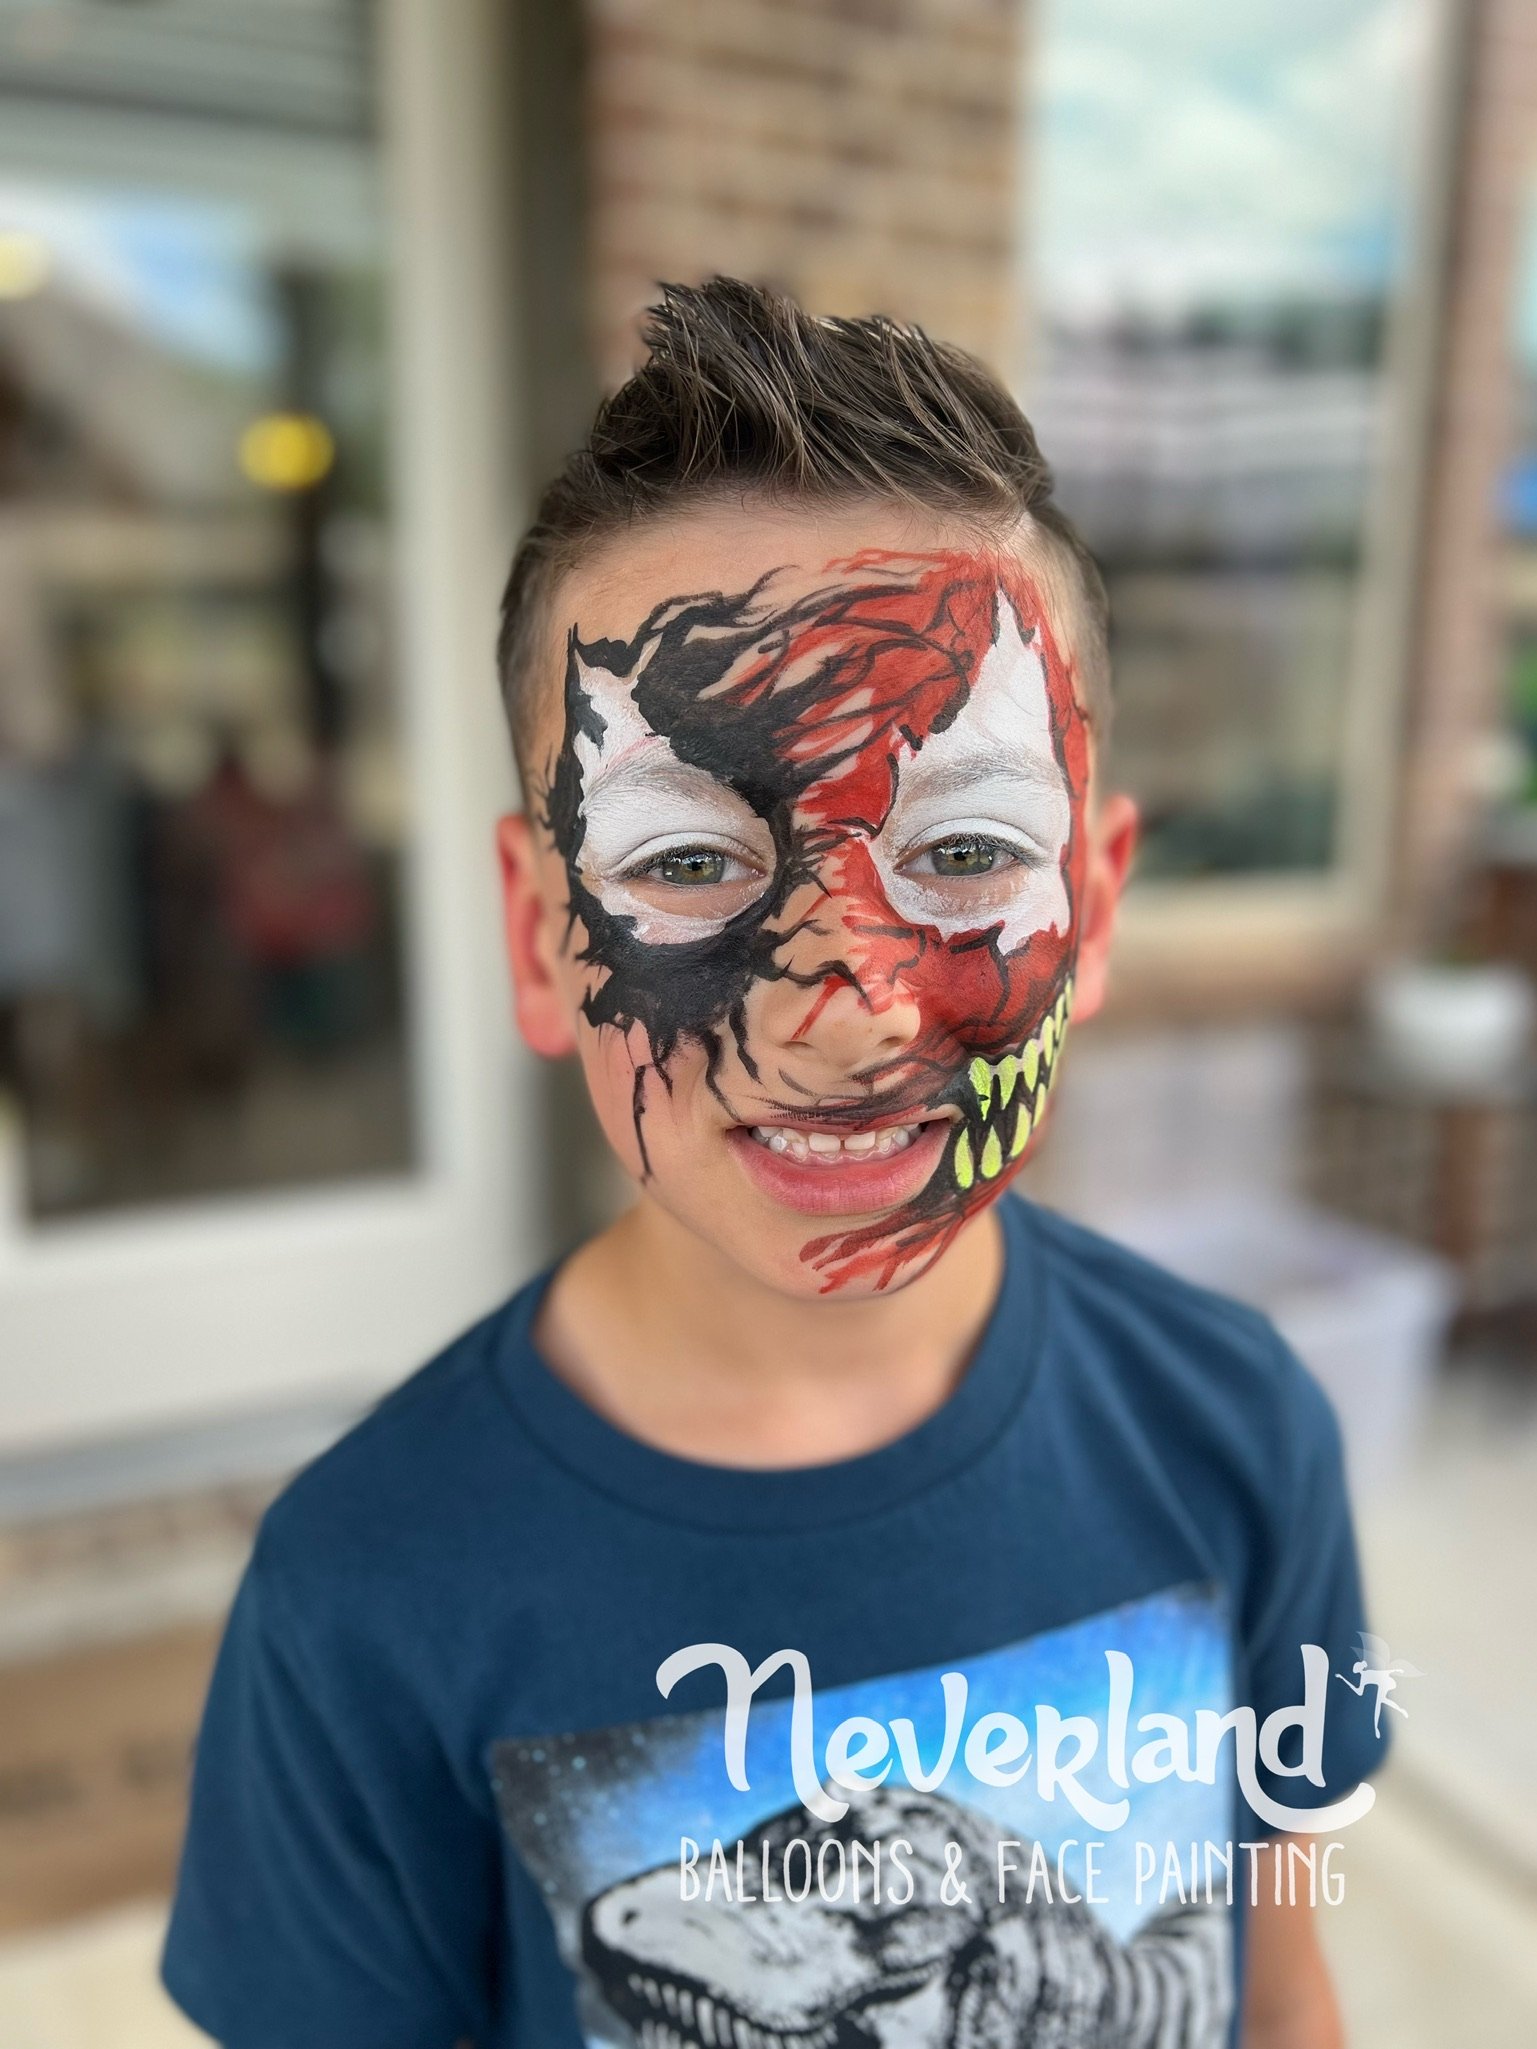 Neverland Balloons and Facepainting